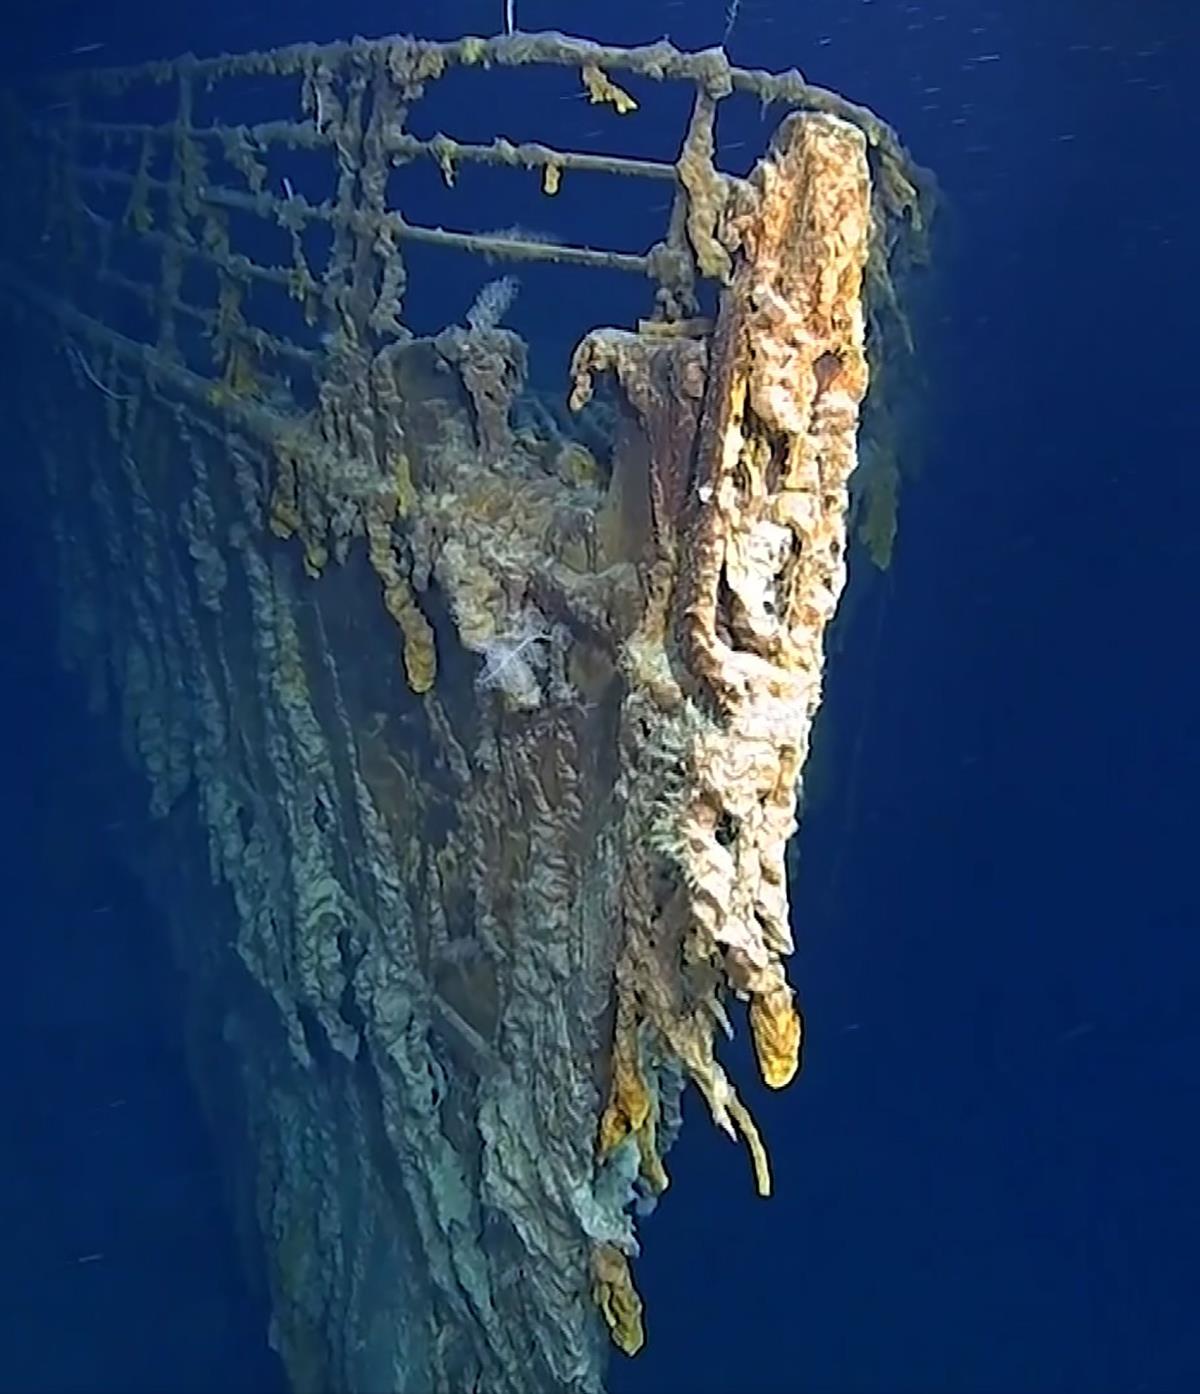 Feds Oppose Summer 2020 Salvage Mission at Titanic Wreck Site